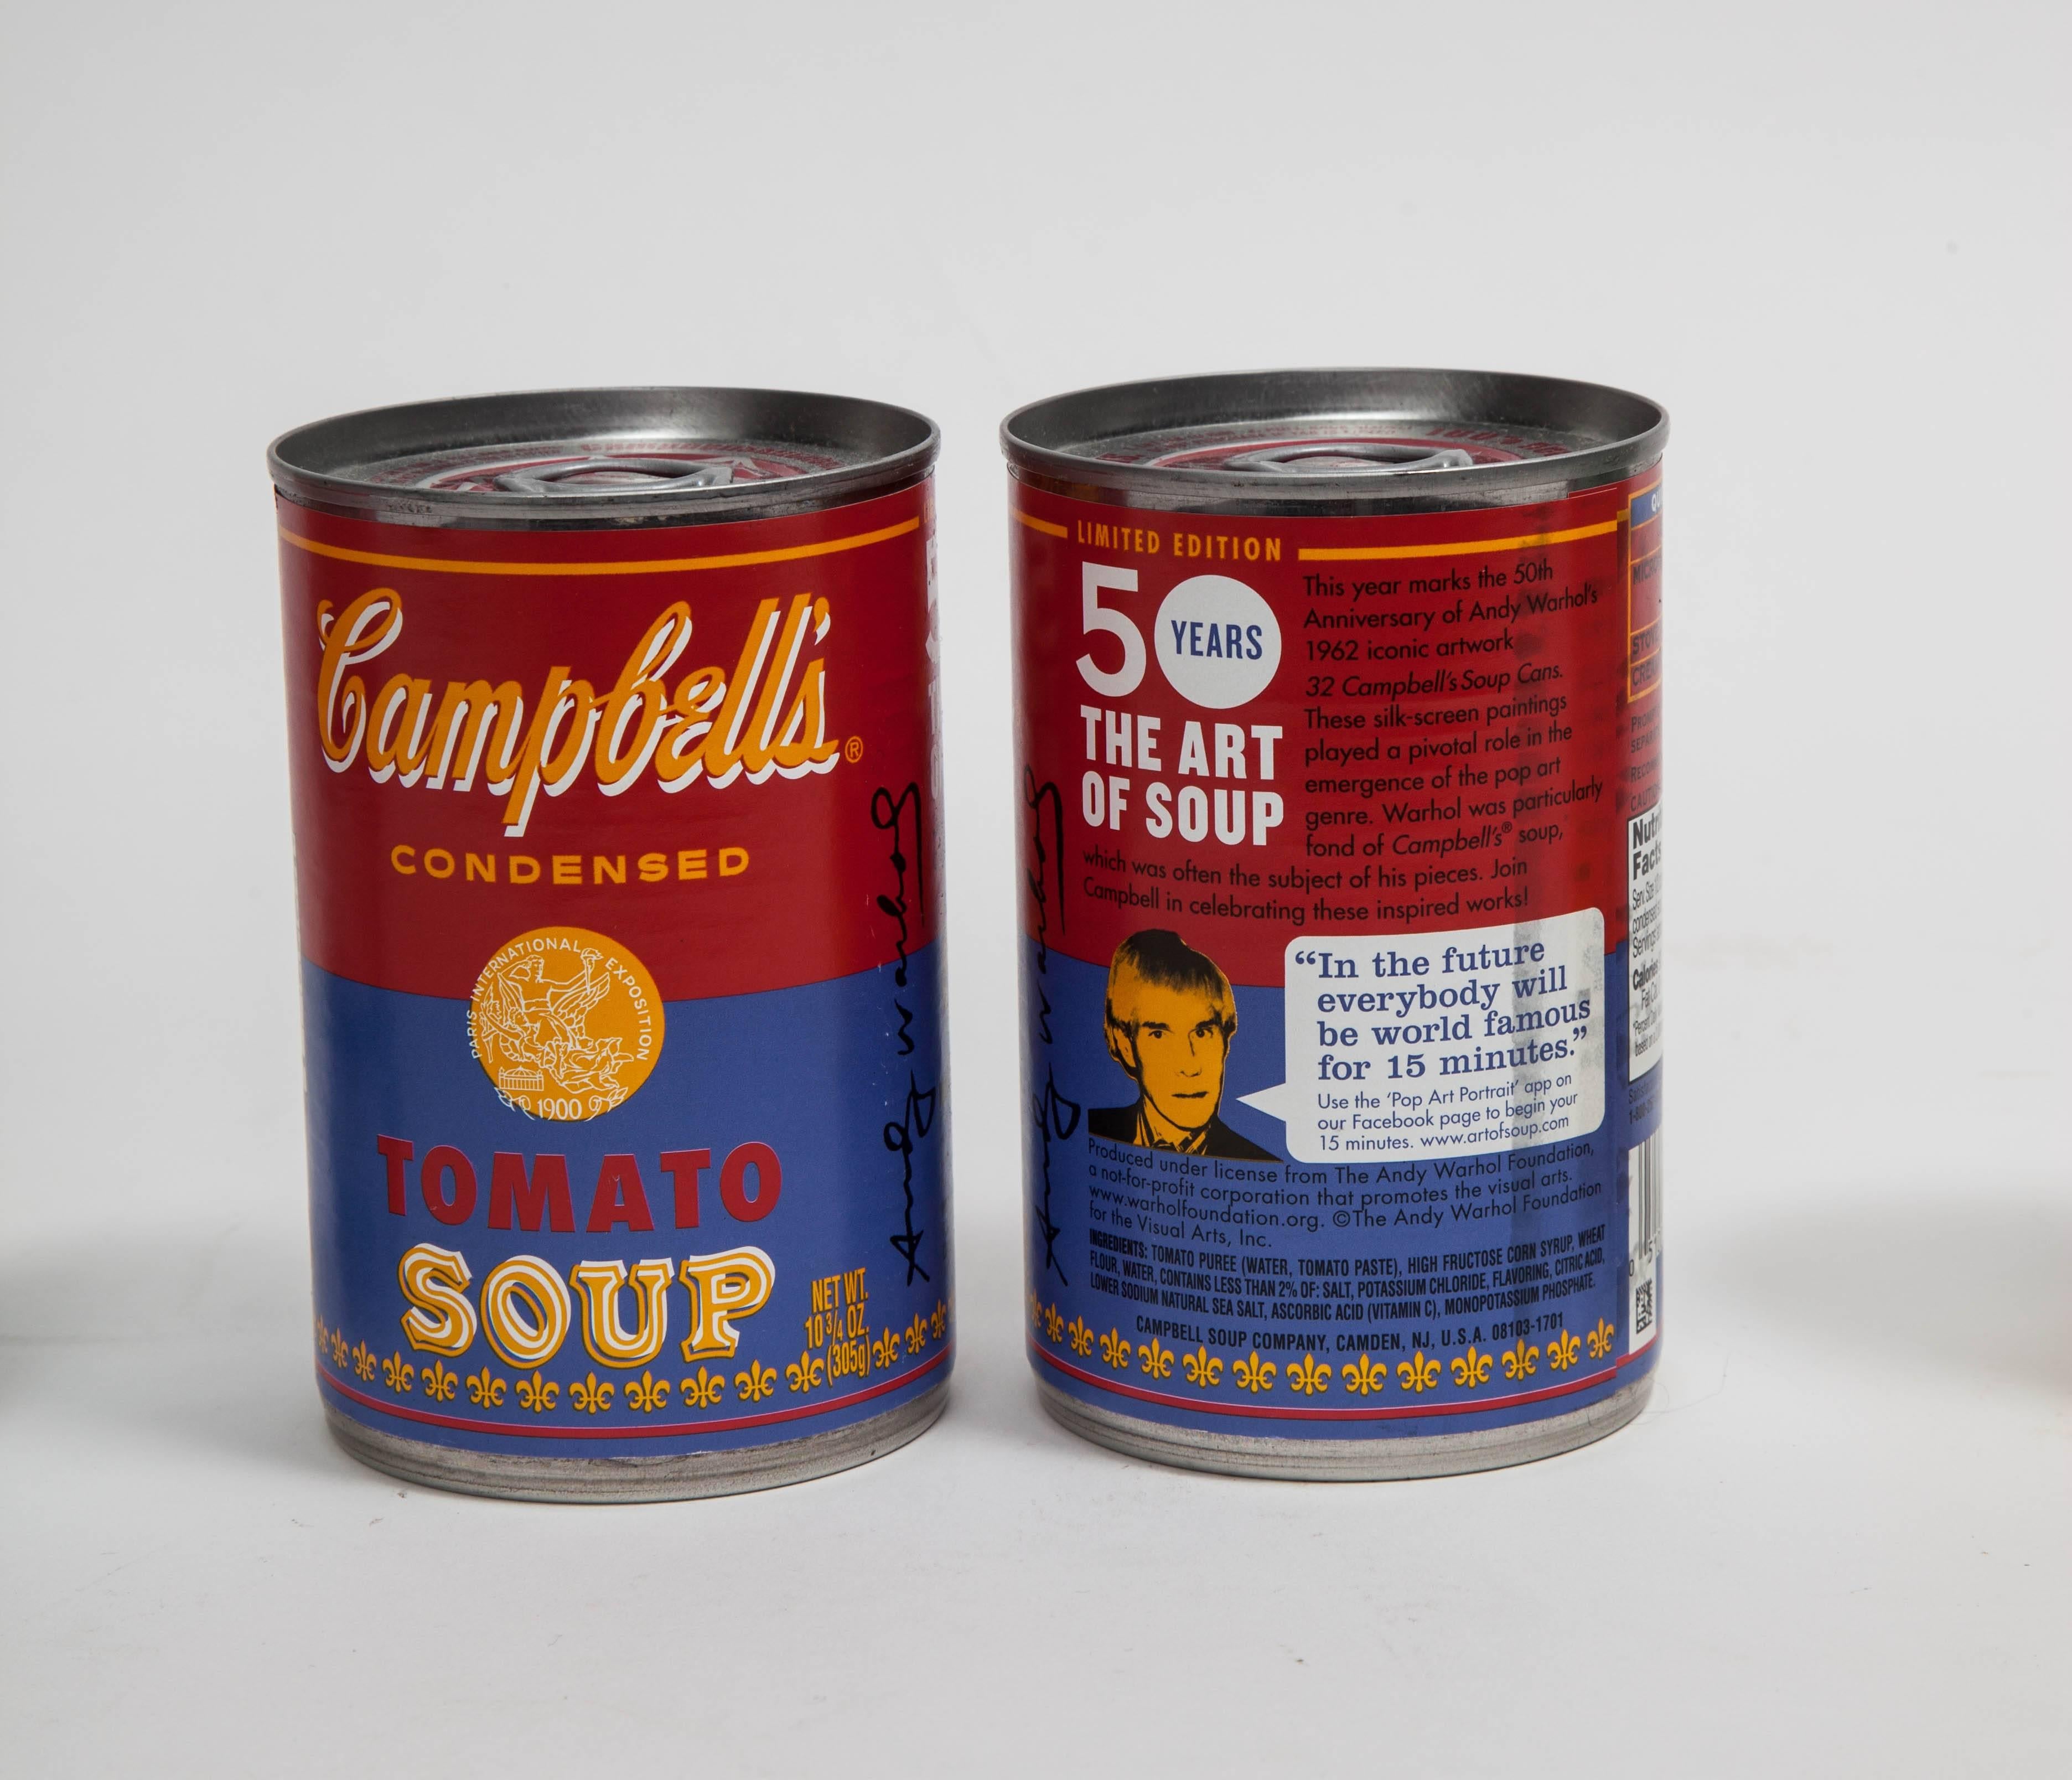 Contemporary Andy Warhol Campbell's Soup Cans 50th Anniversary Limited Edition, USA 2012